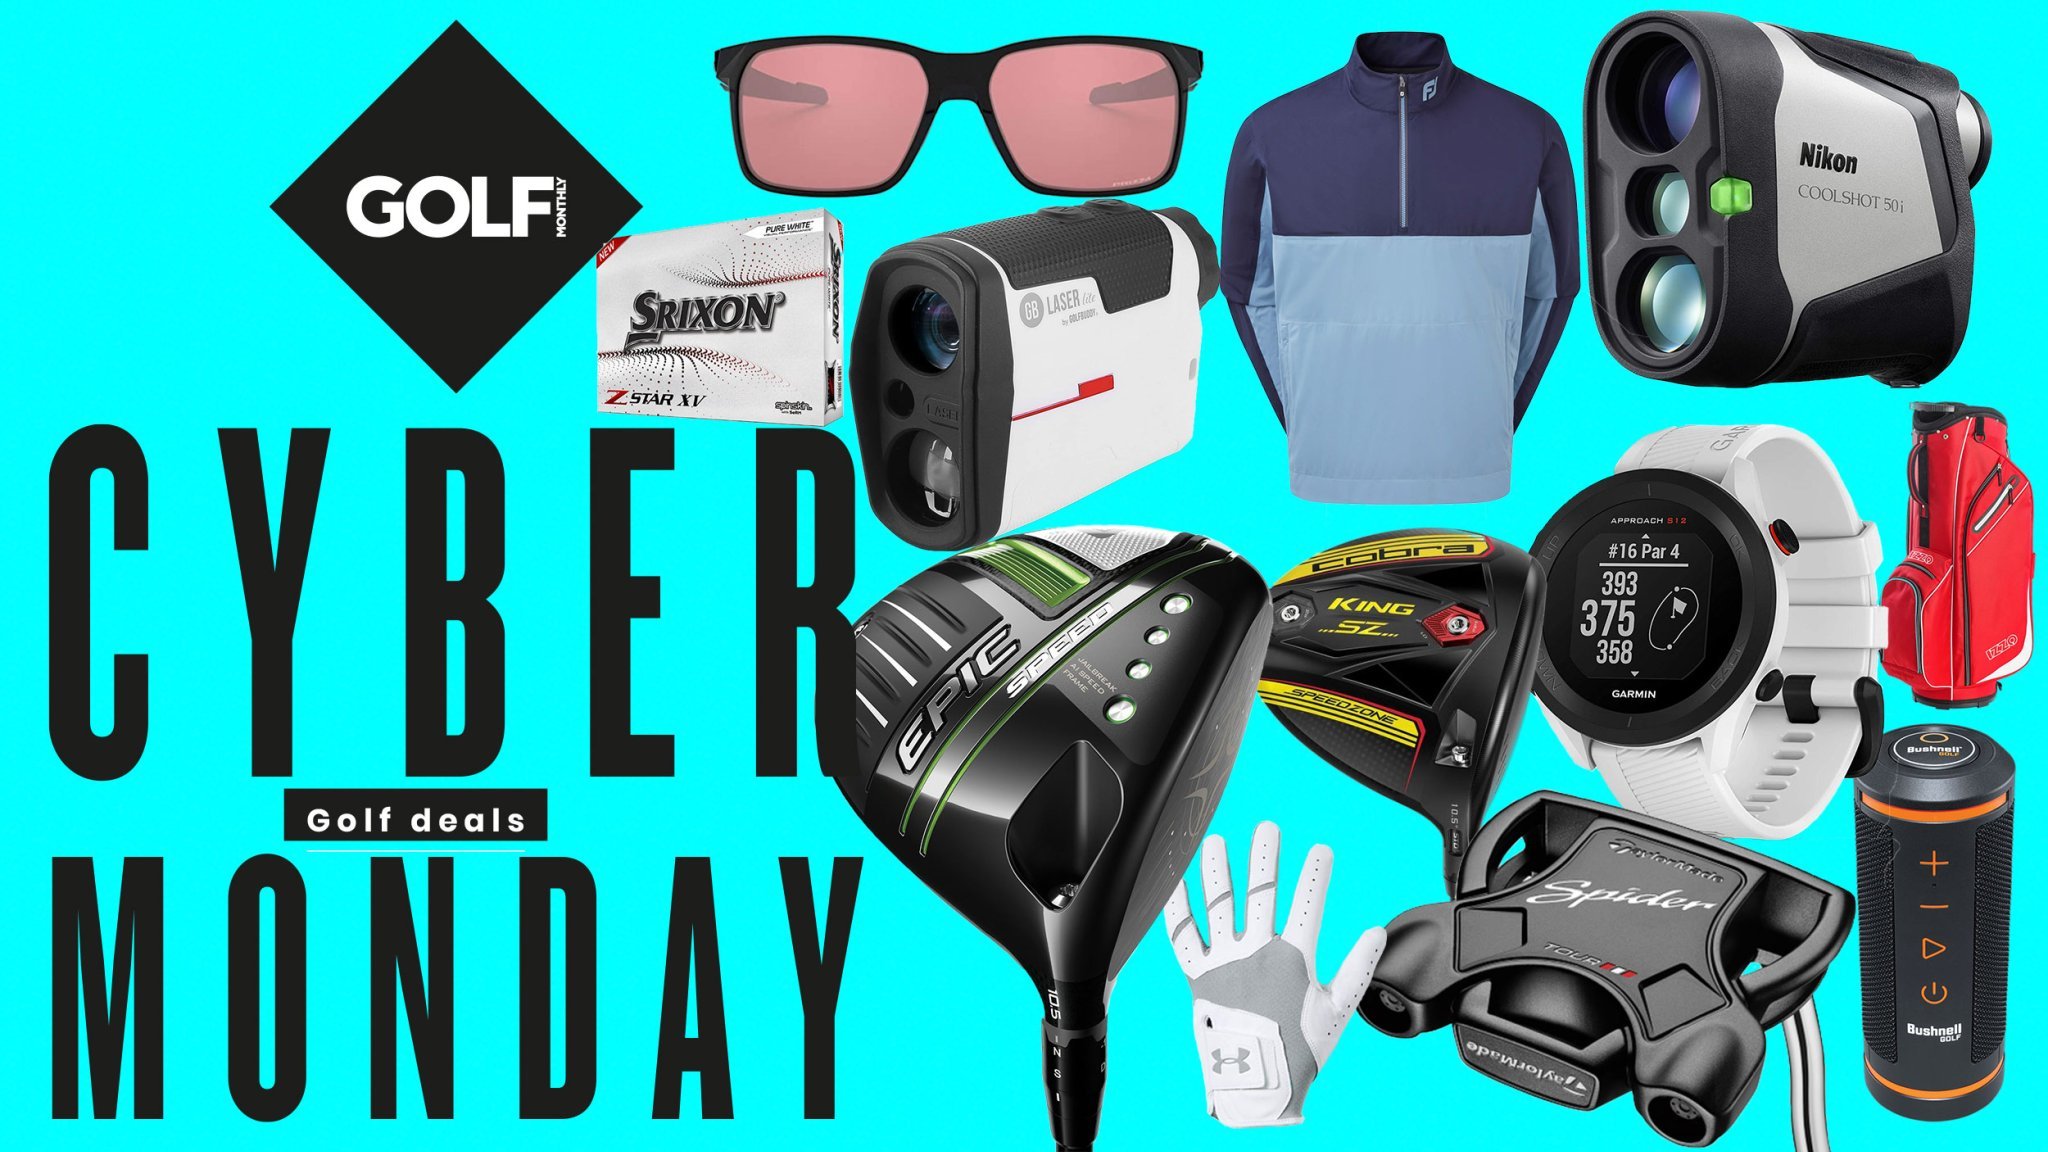 Cyber Monday Deals LIVE Blog: Rangefinders, Balls, Clubs, Shoes, Tech And More